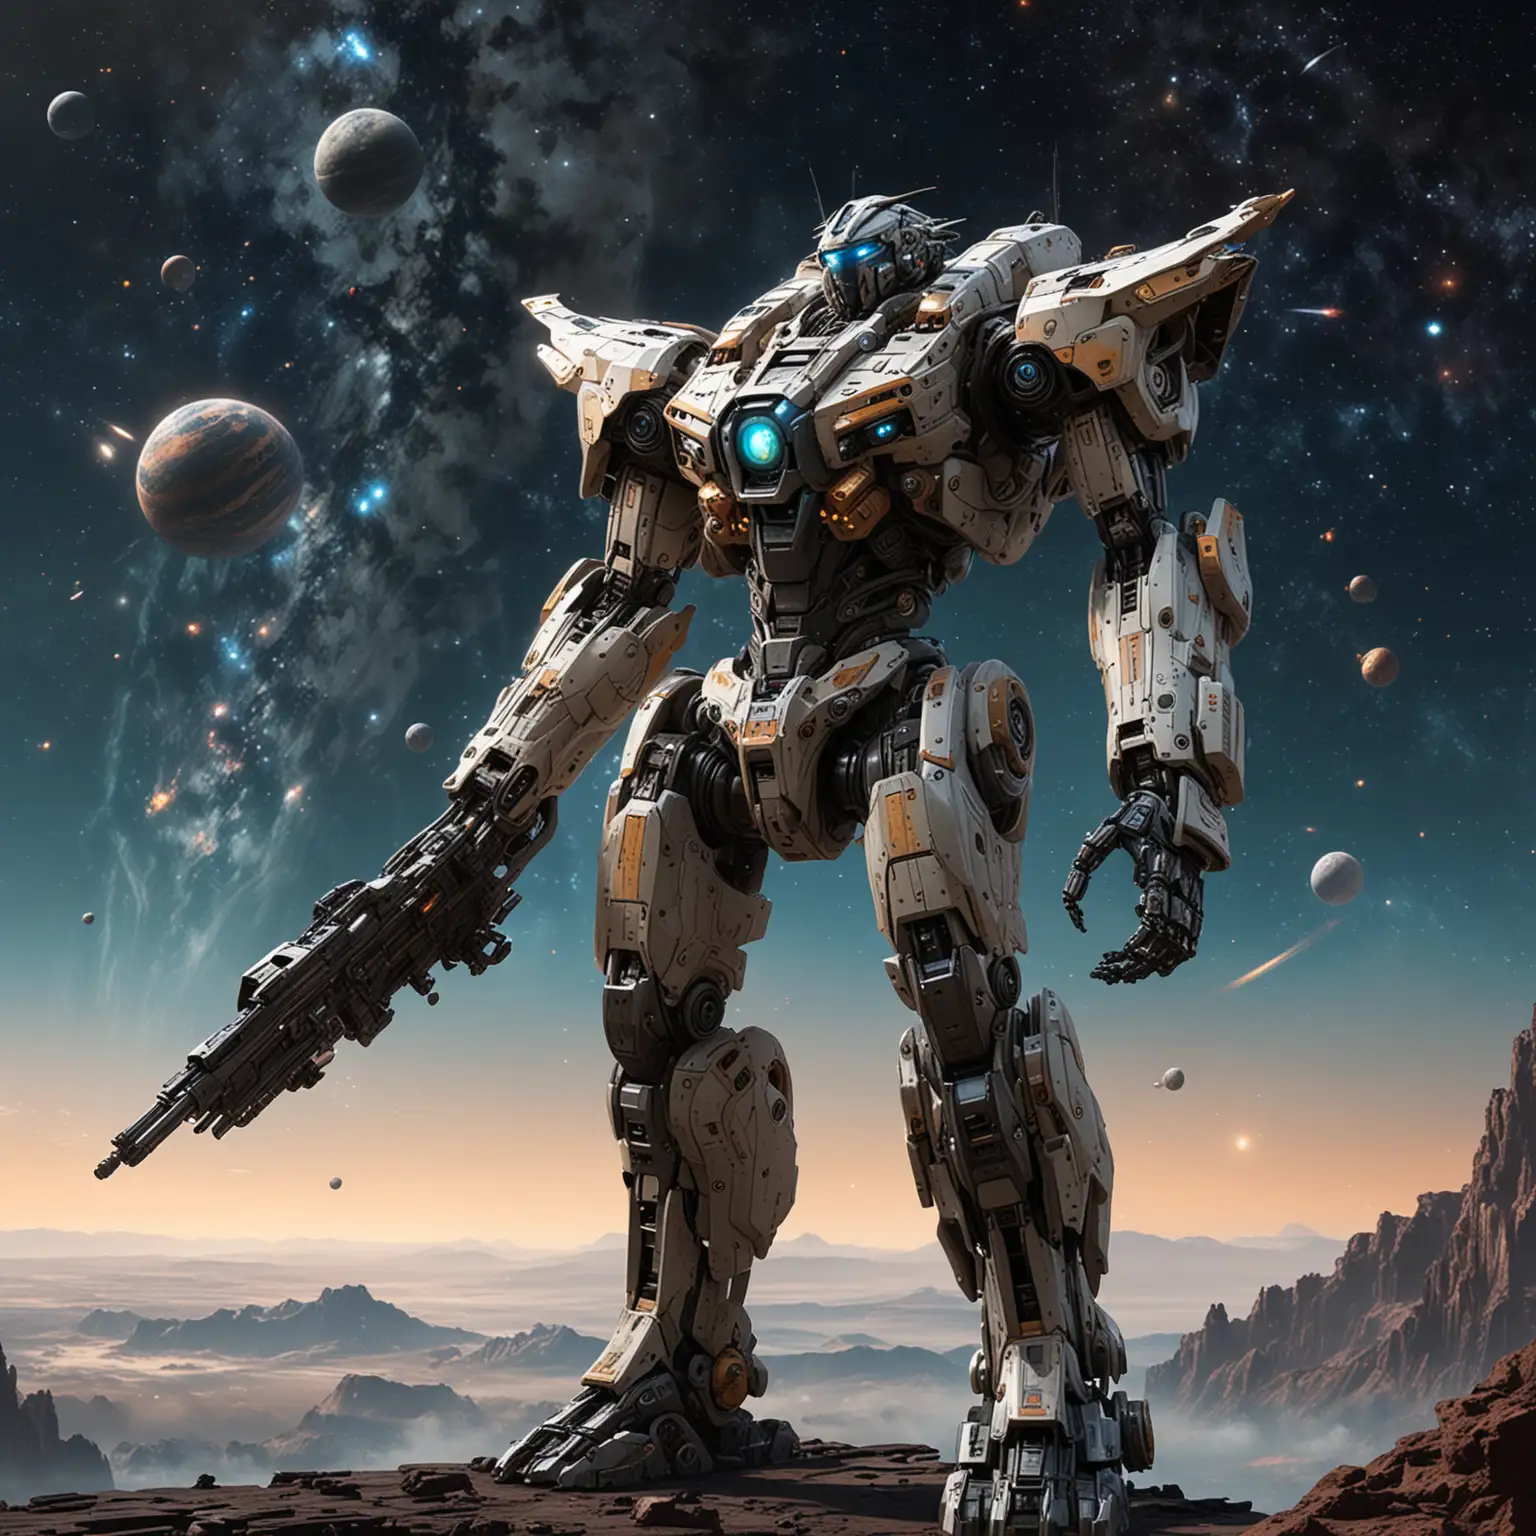 Huge industrial-style humanoid mecha are flying in the universe, with stars, nebulae and distant planets in the background.The overall design is sleek, modern, and sophisticated, with a strong sci-fi aesthetic.